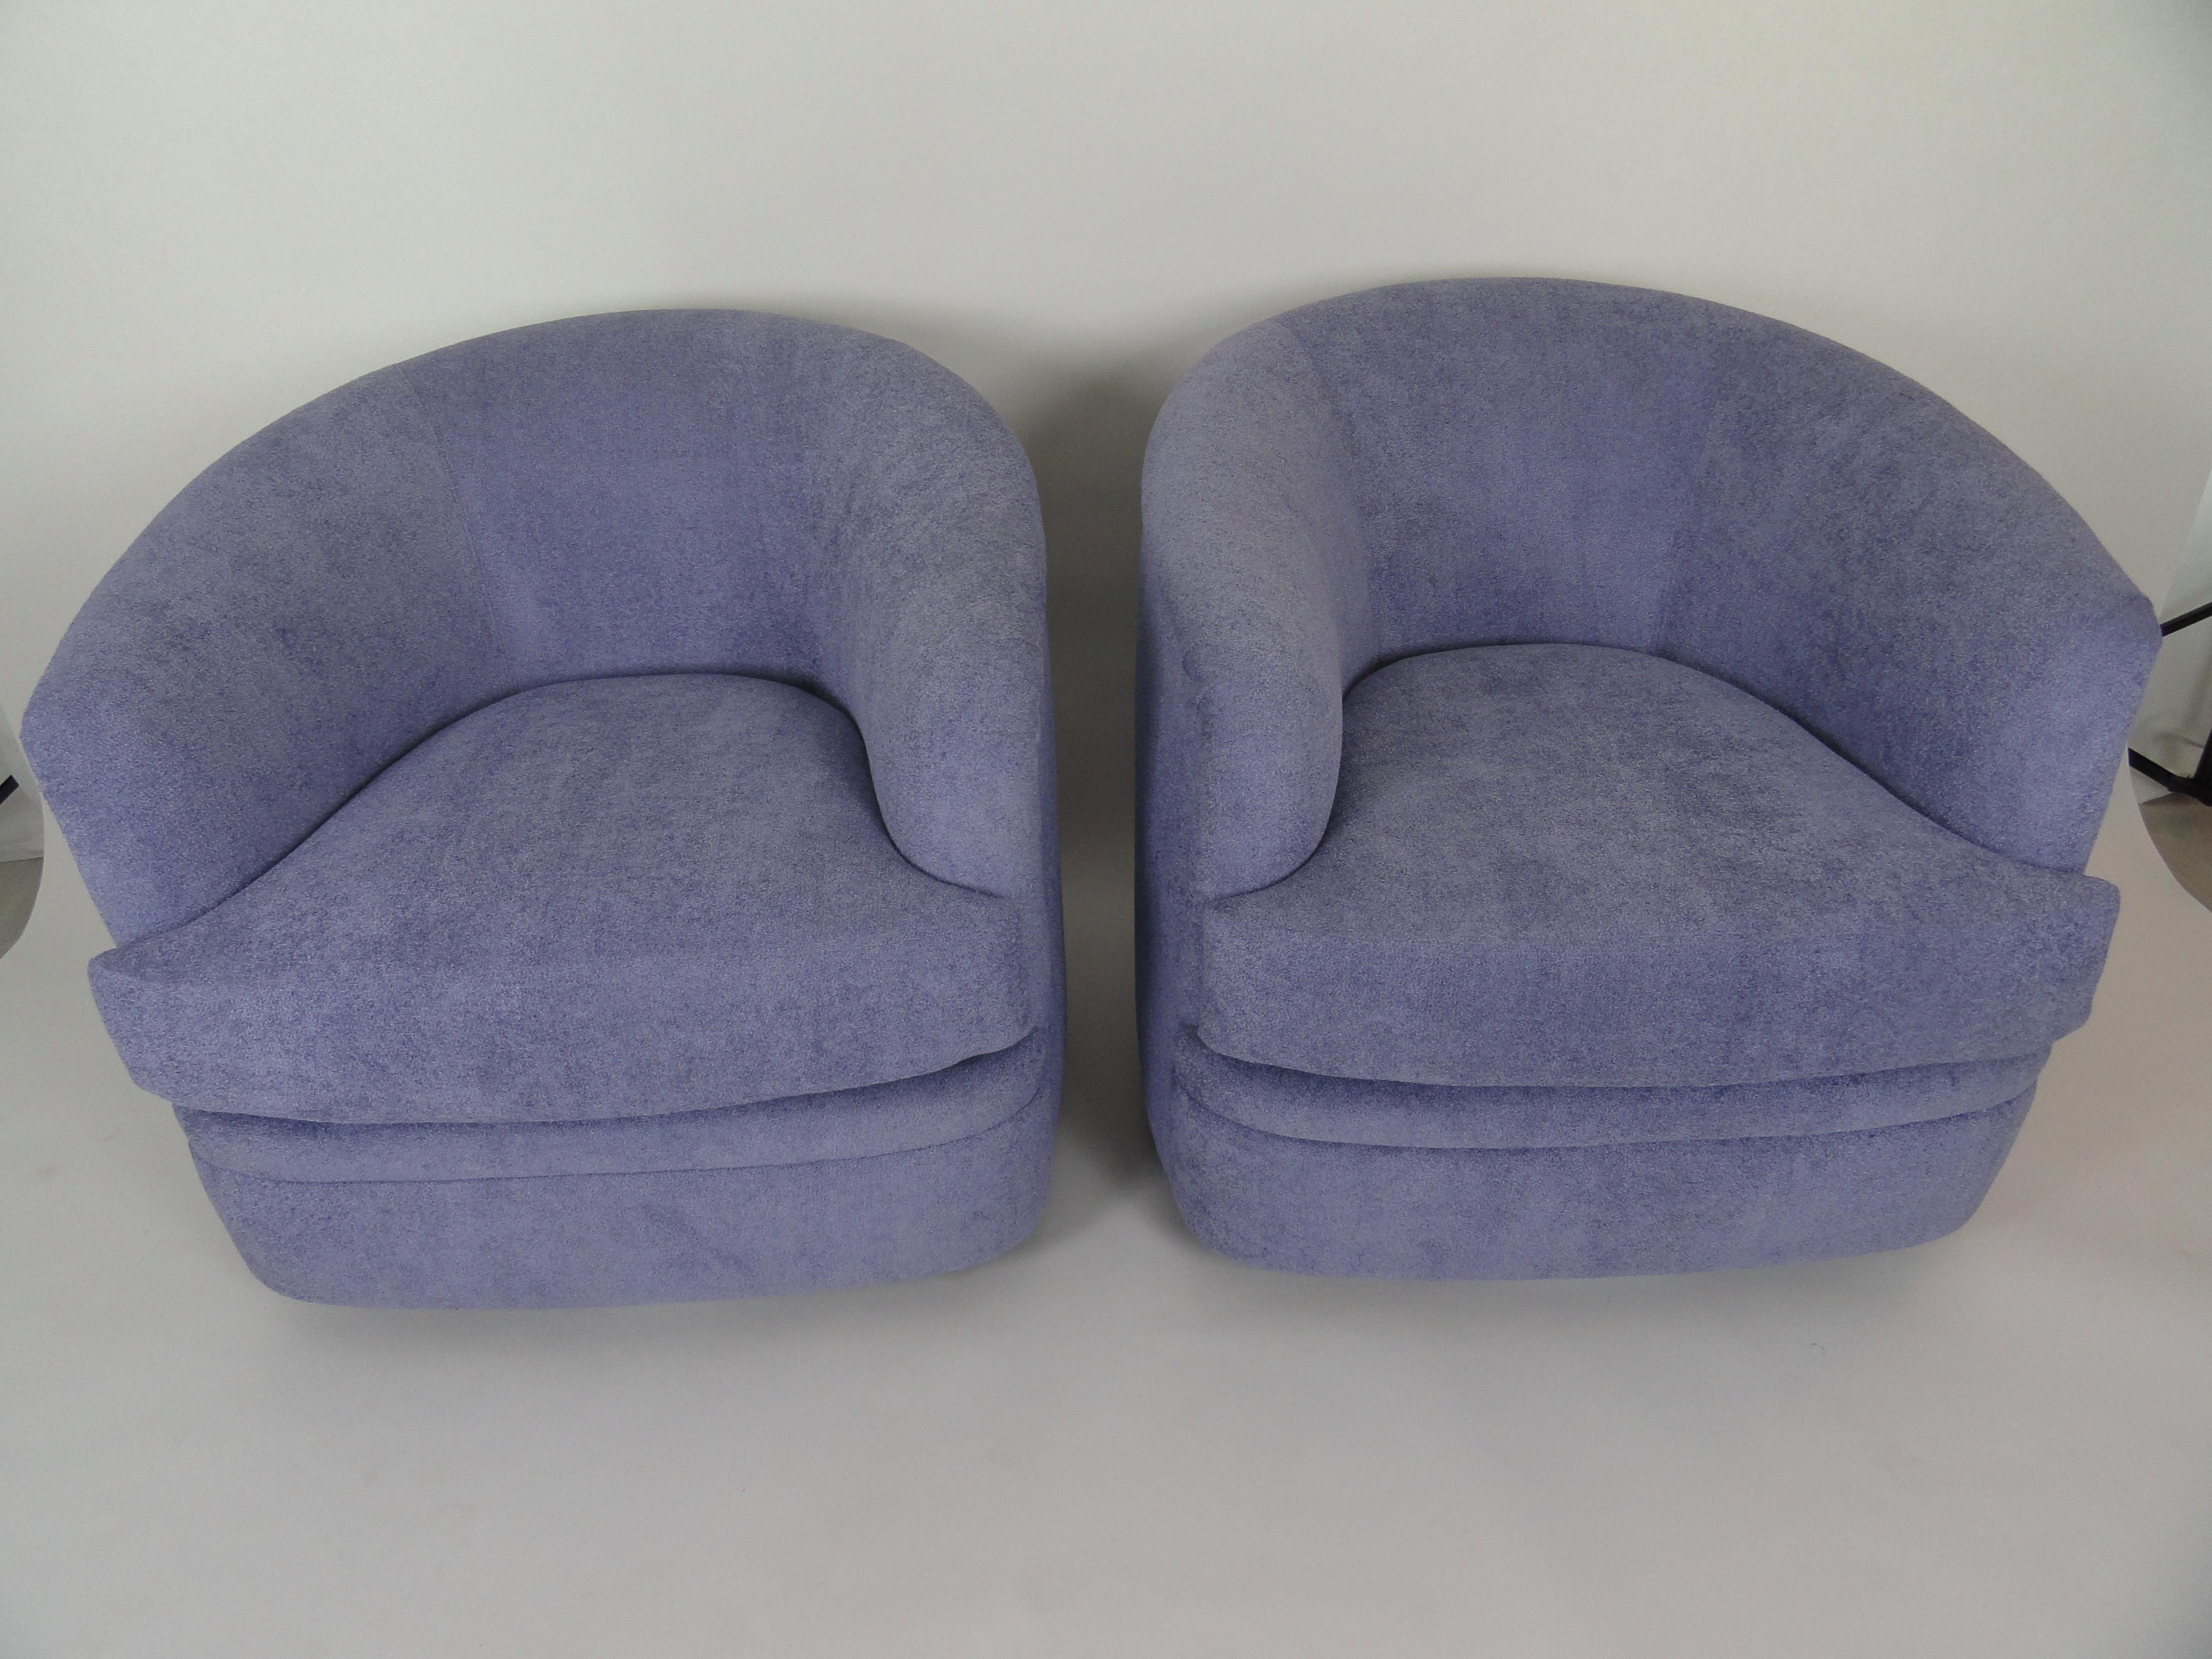 Pair of Milo Baughman style swivel lounge chairs, newly upholstered in indoor outdoor fabric.